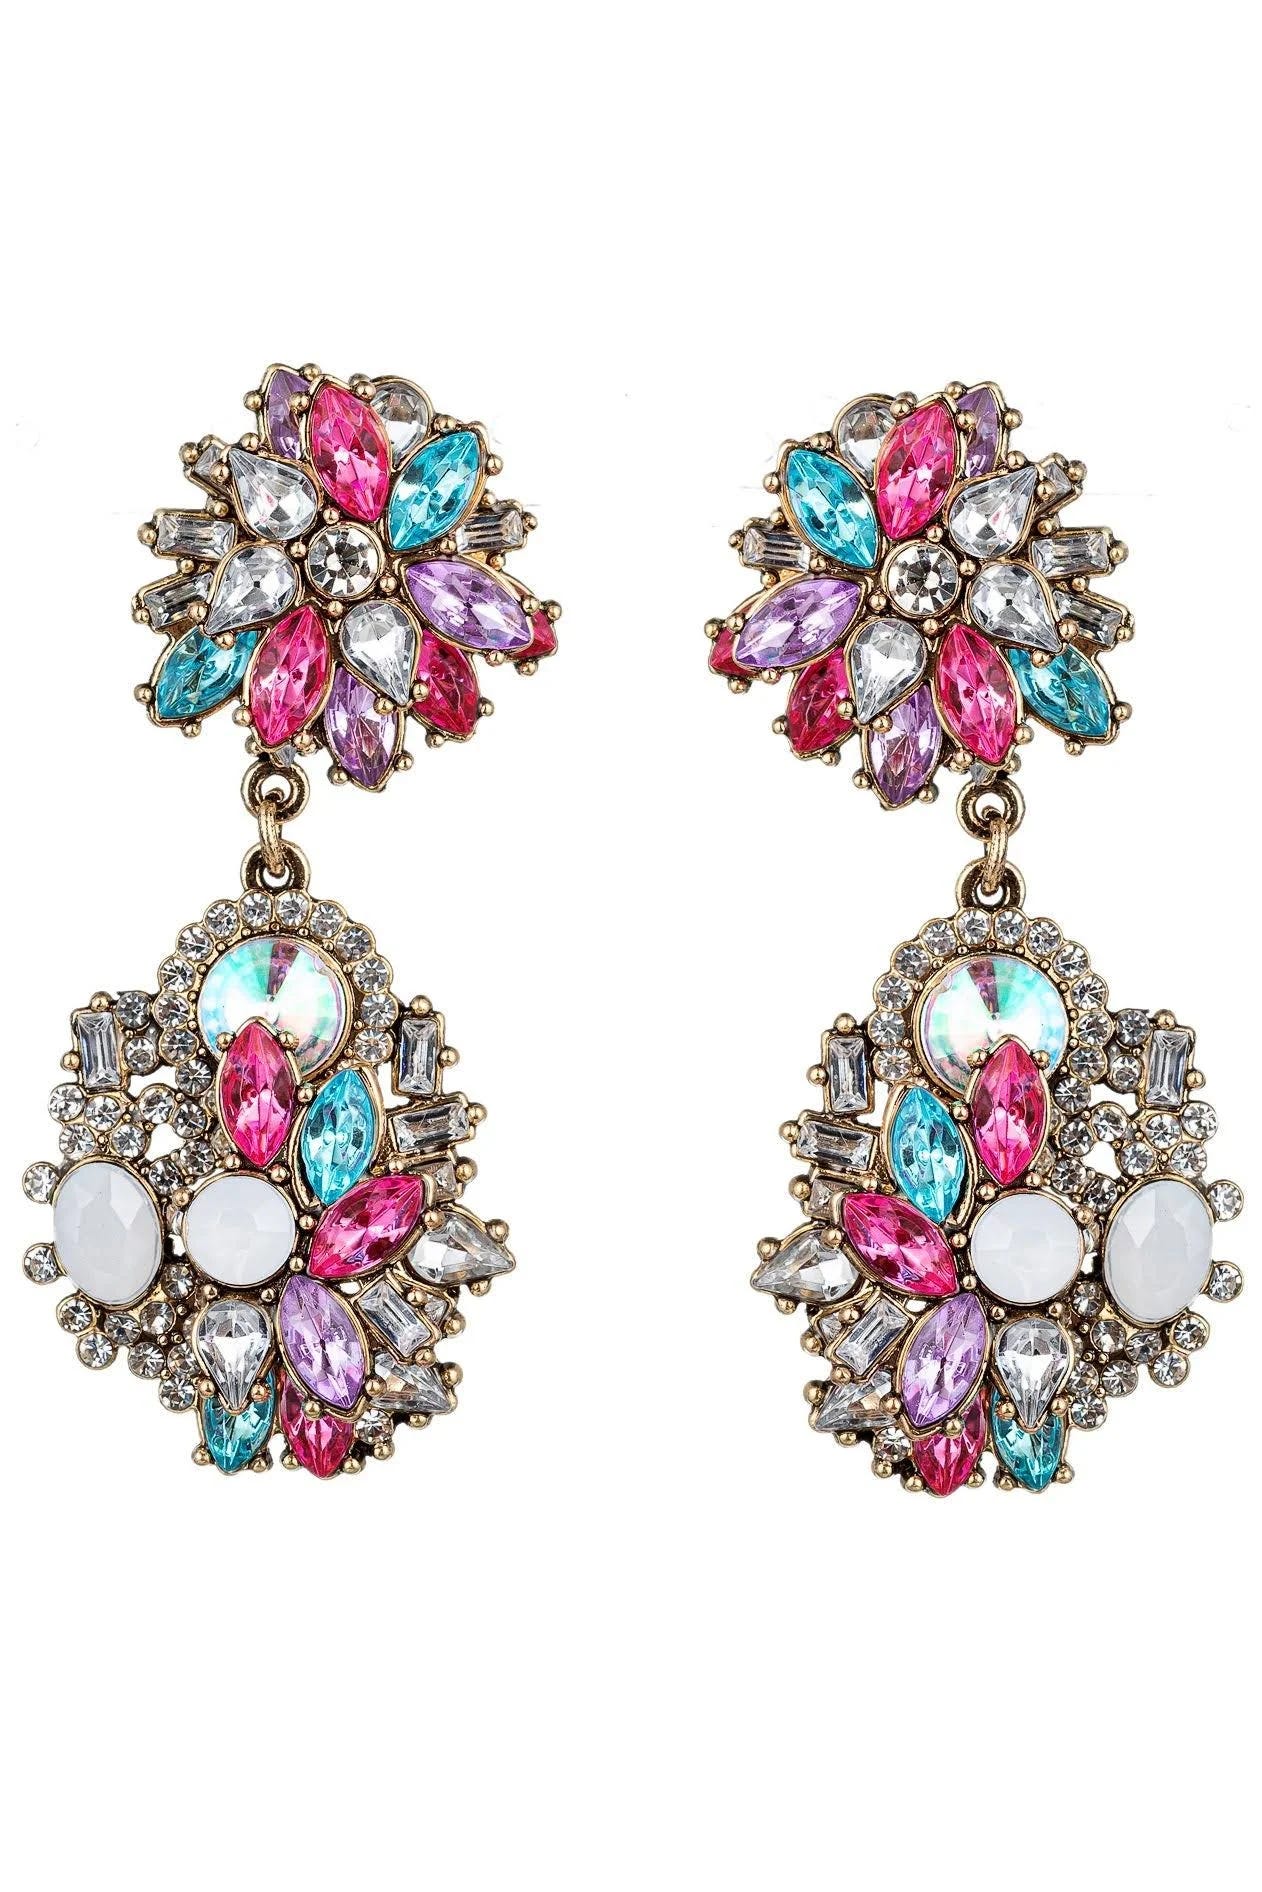 Vibrant Hot Pink Statement Earrings for a Bold Look | Image